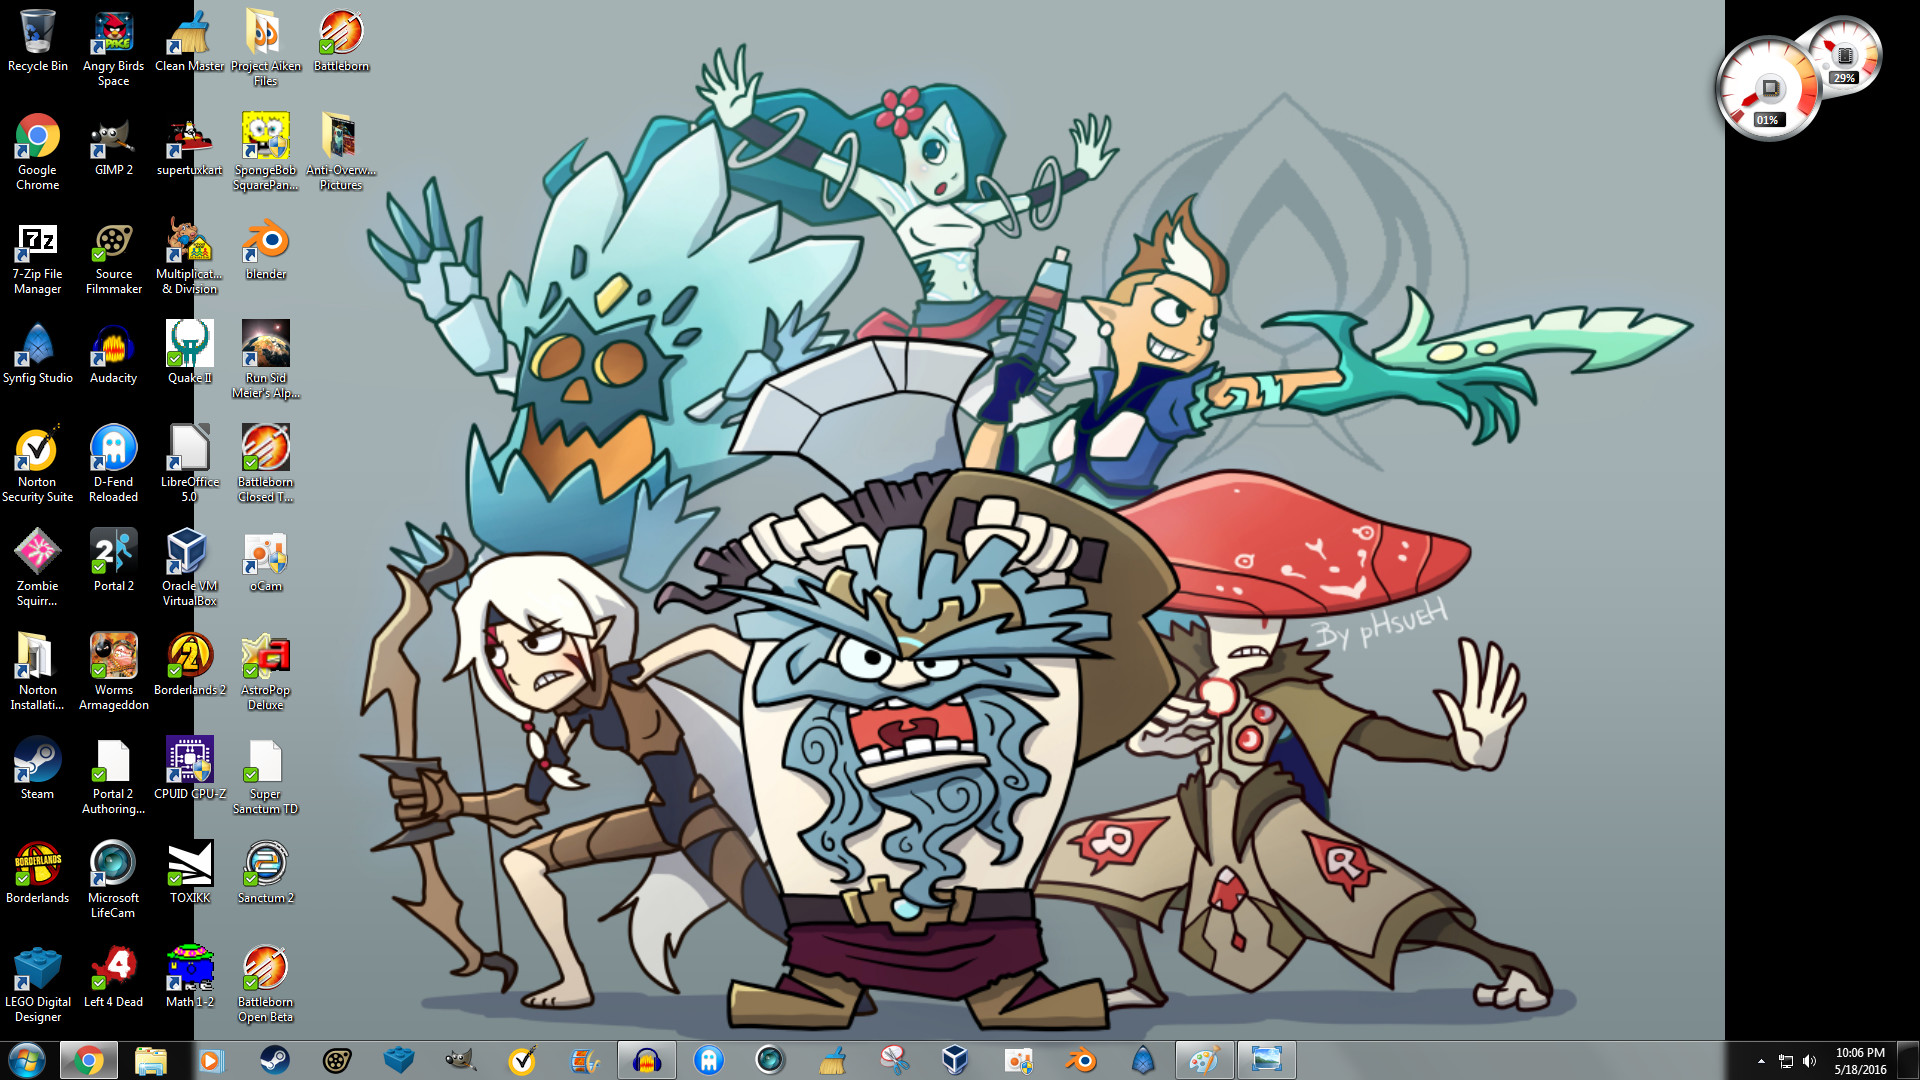 1920x1080 This is my desktop currently. It's a piece of Battleborn fanart that I  found somewhere.